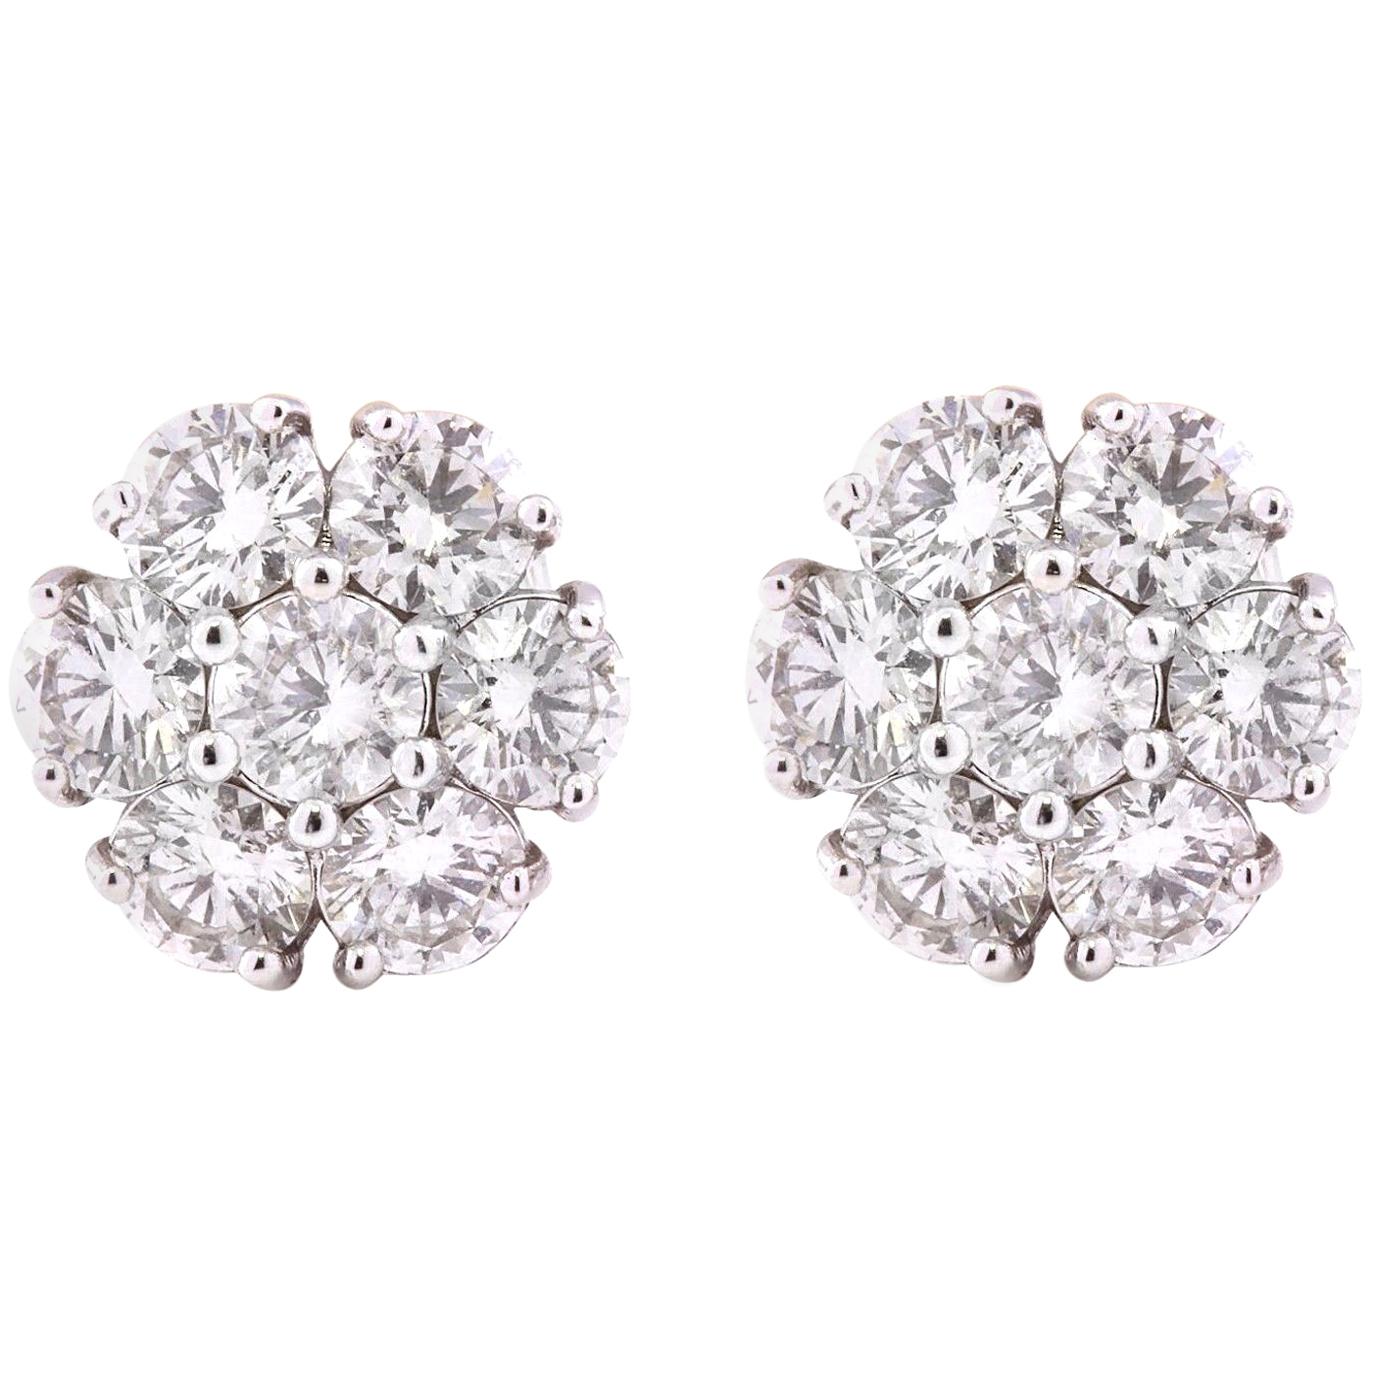 Dazzling 3.00 Carat Diamond Earrings in 14K Solid White Gold For Sale